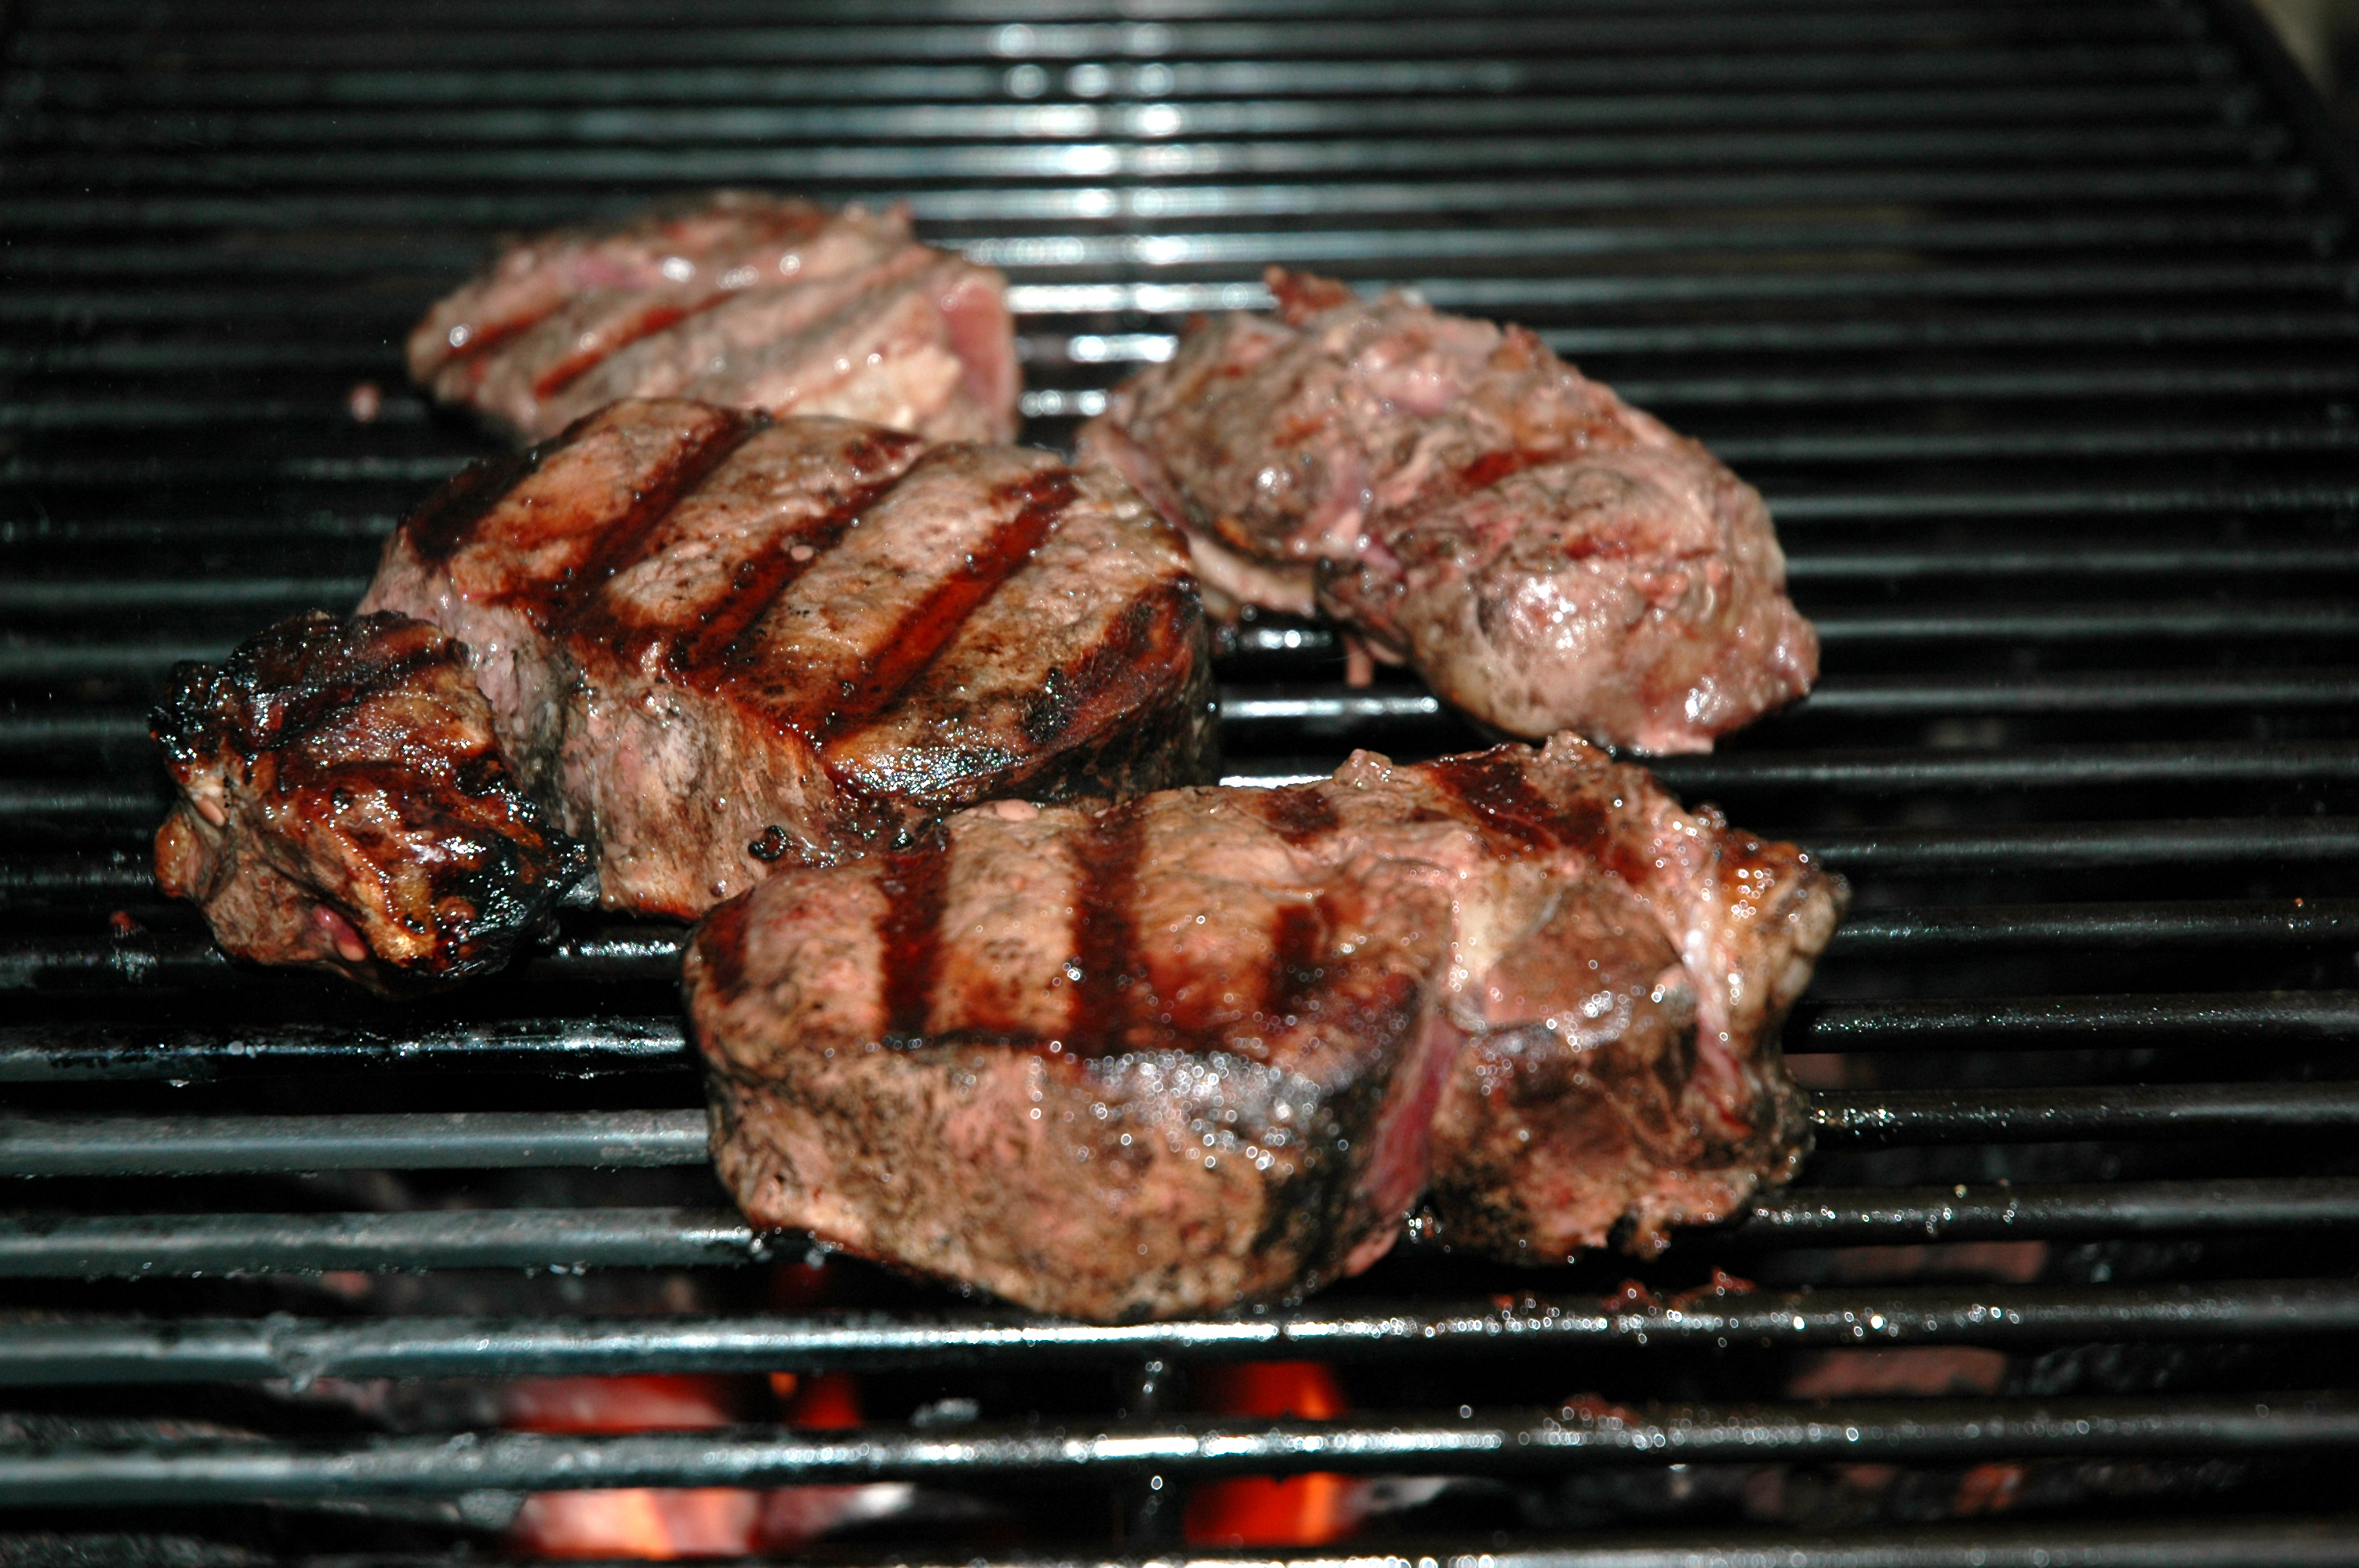 Steak on a hot grill